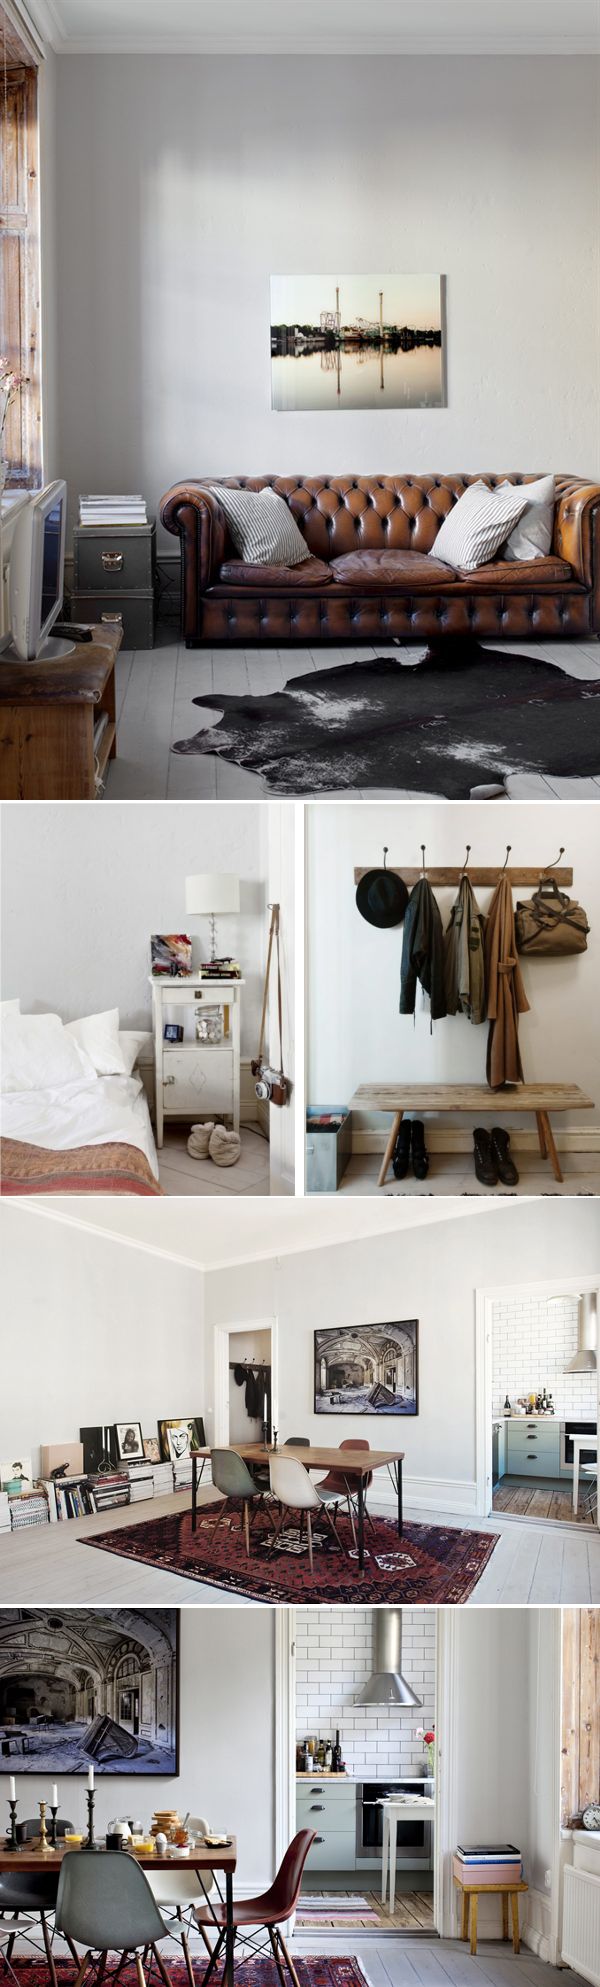 42m2 Stockholm // I love everything, except for the animal rug in the first fram...